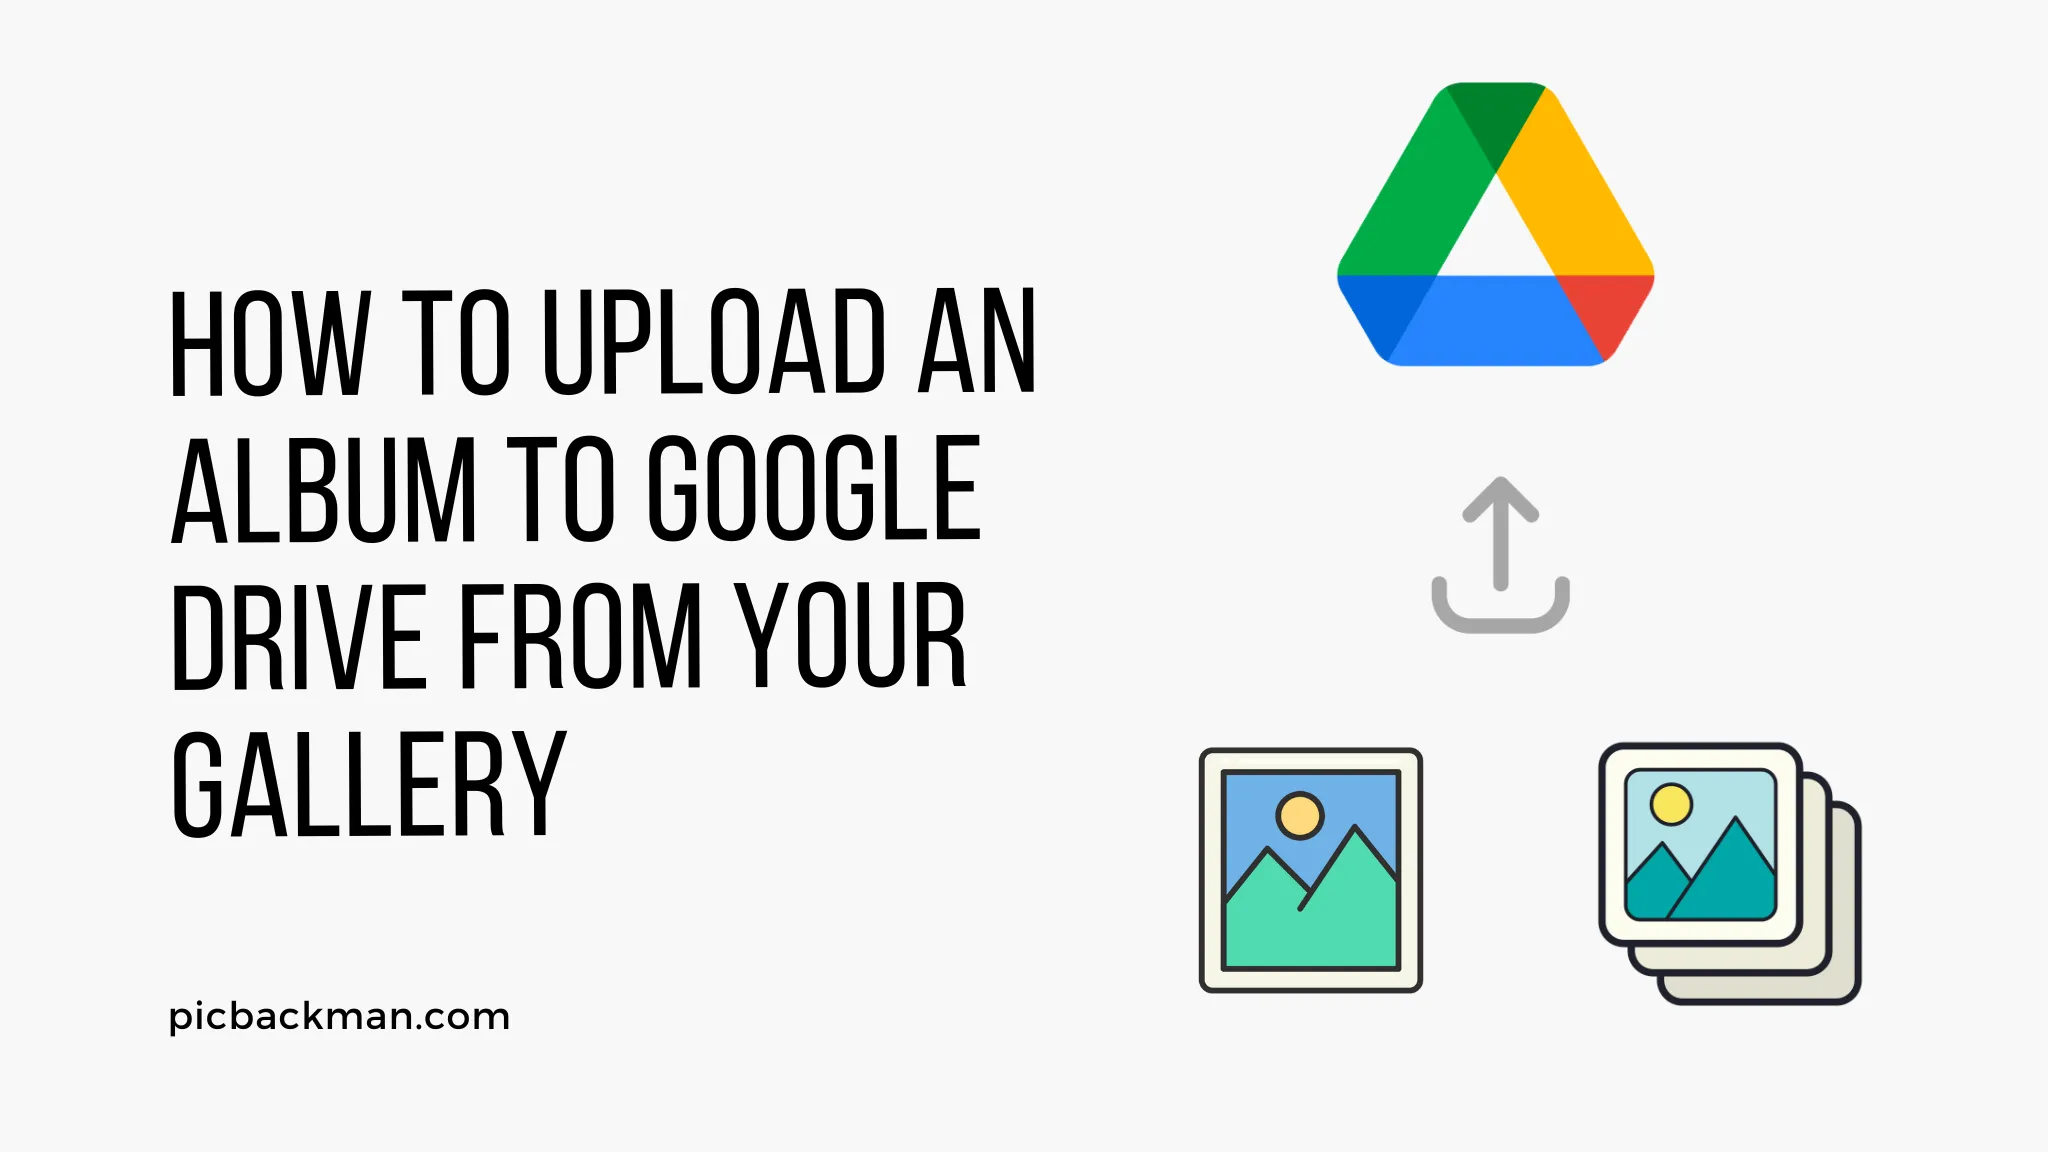 How to upload an album to Google Drive from your gallery